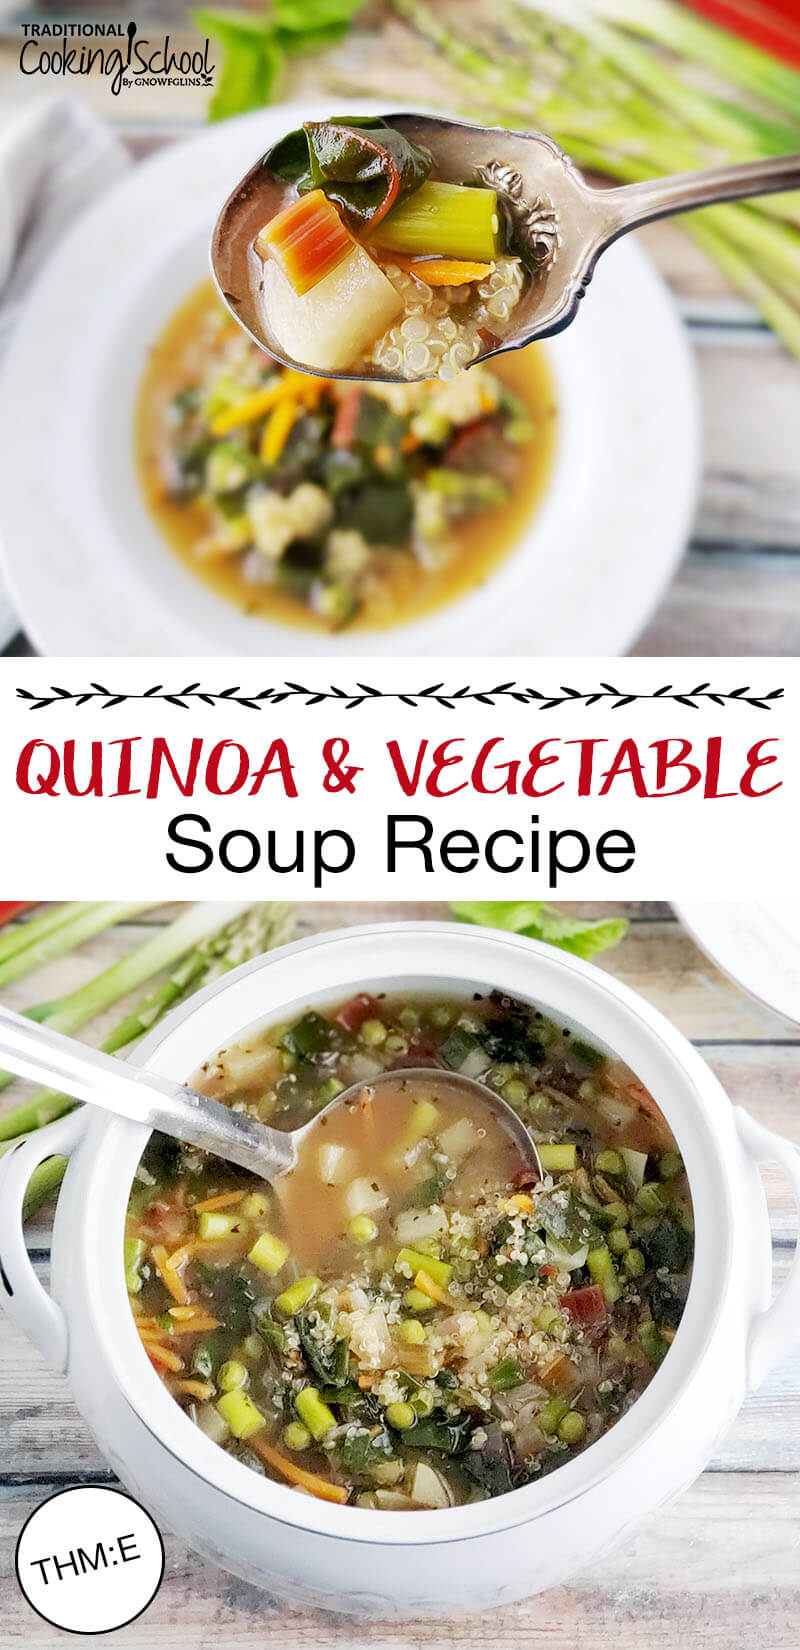 photo collage of soup, with text overlay: "Quinoa & Vegetable Soup Recipe (THM:E)"